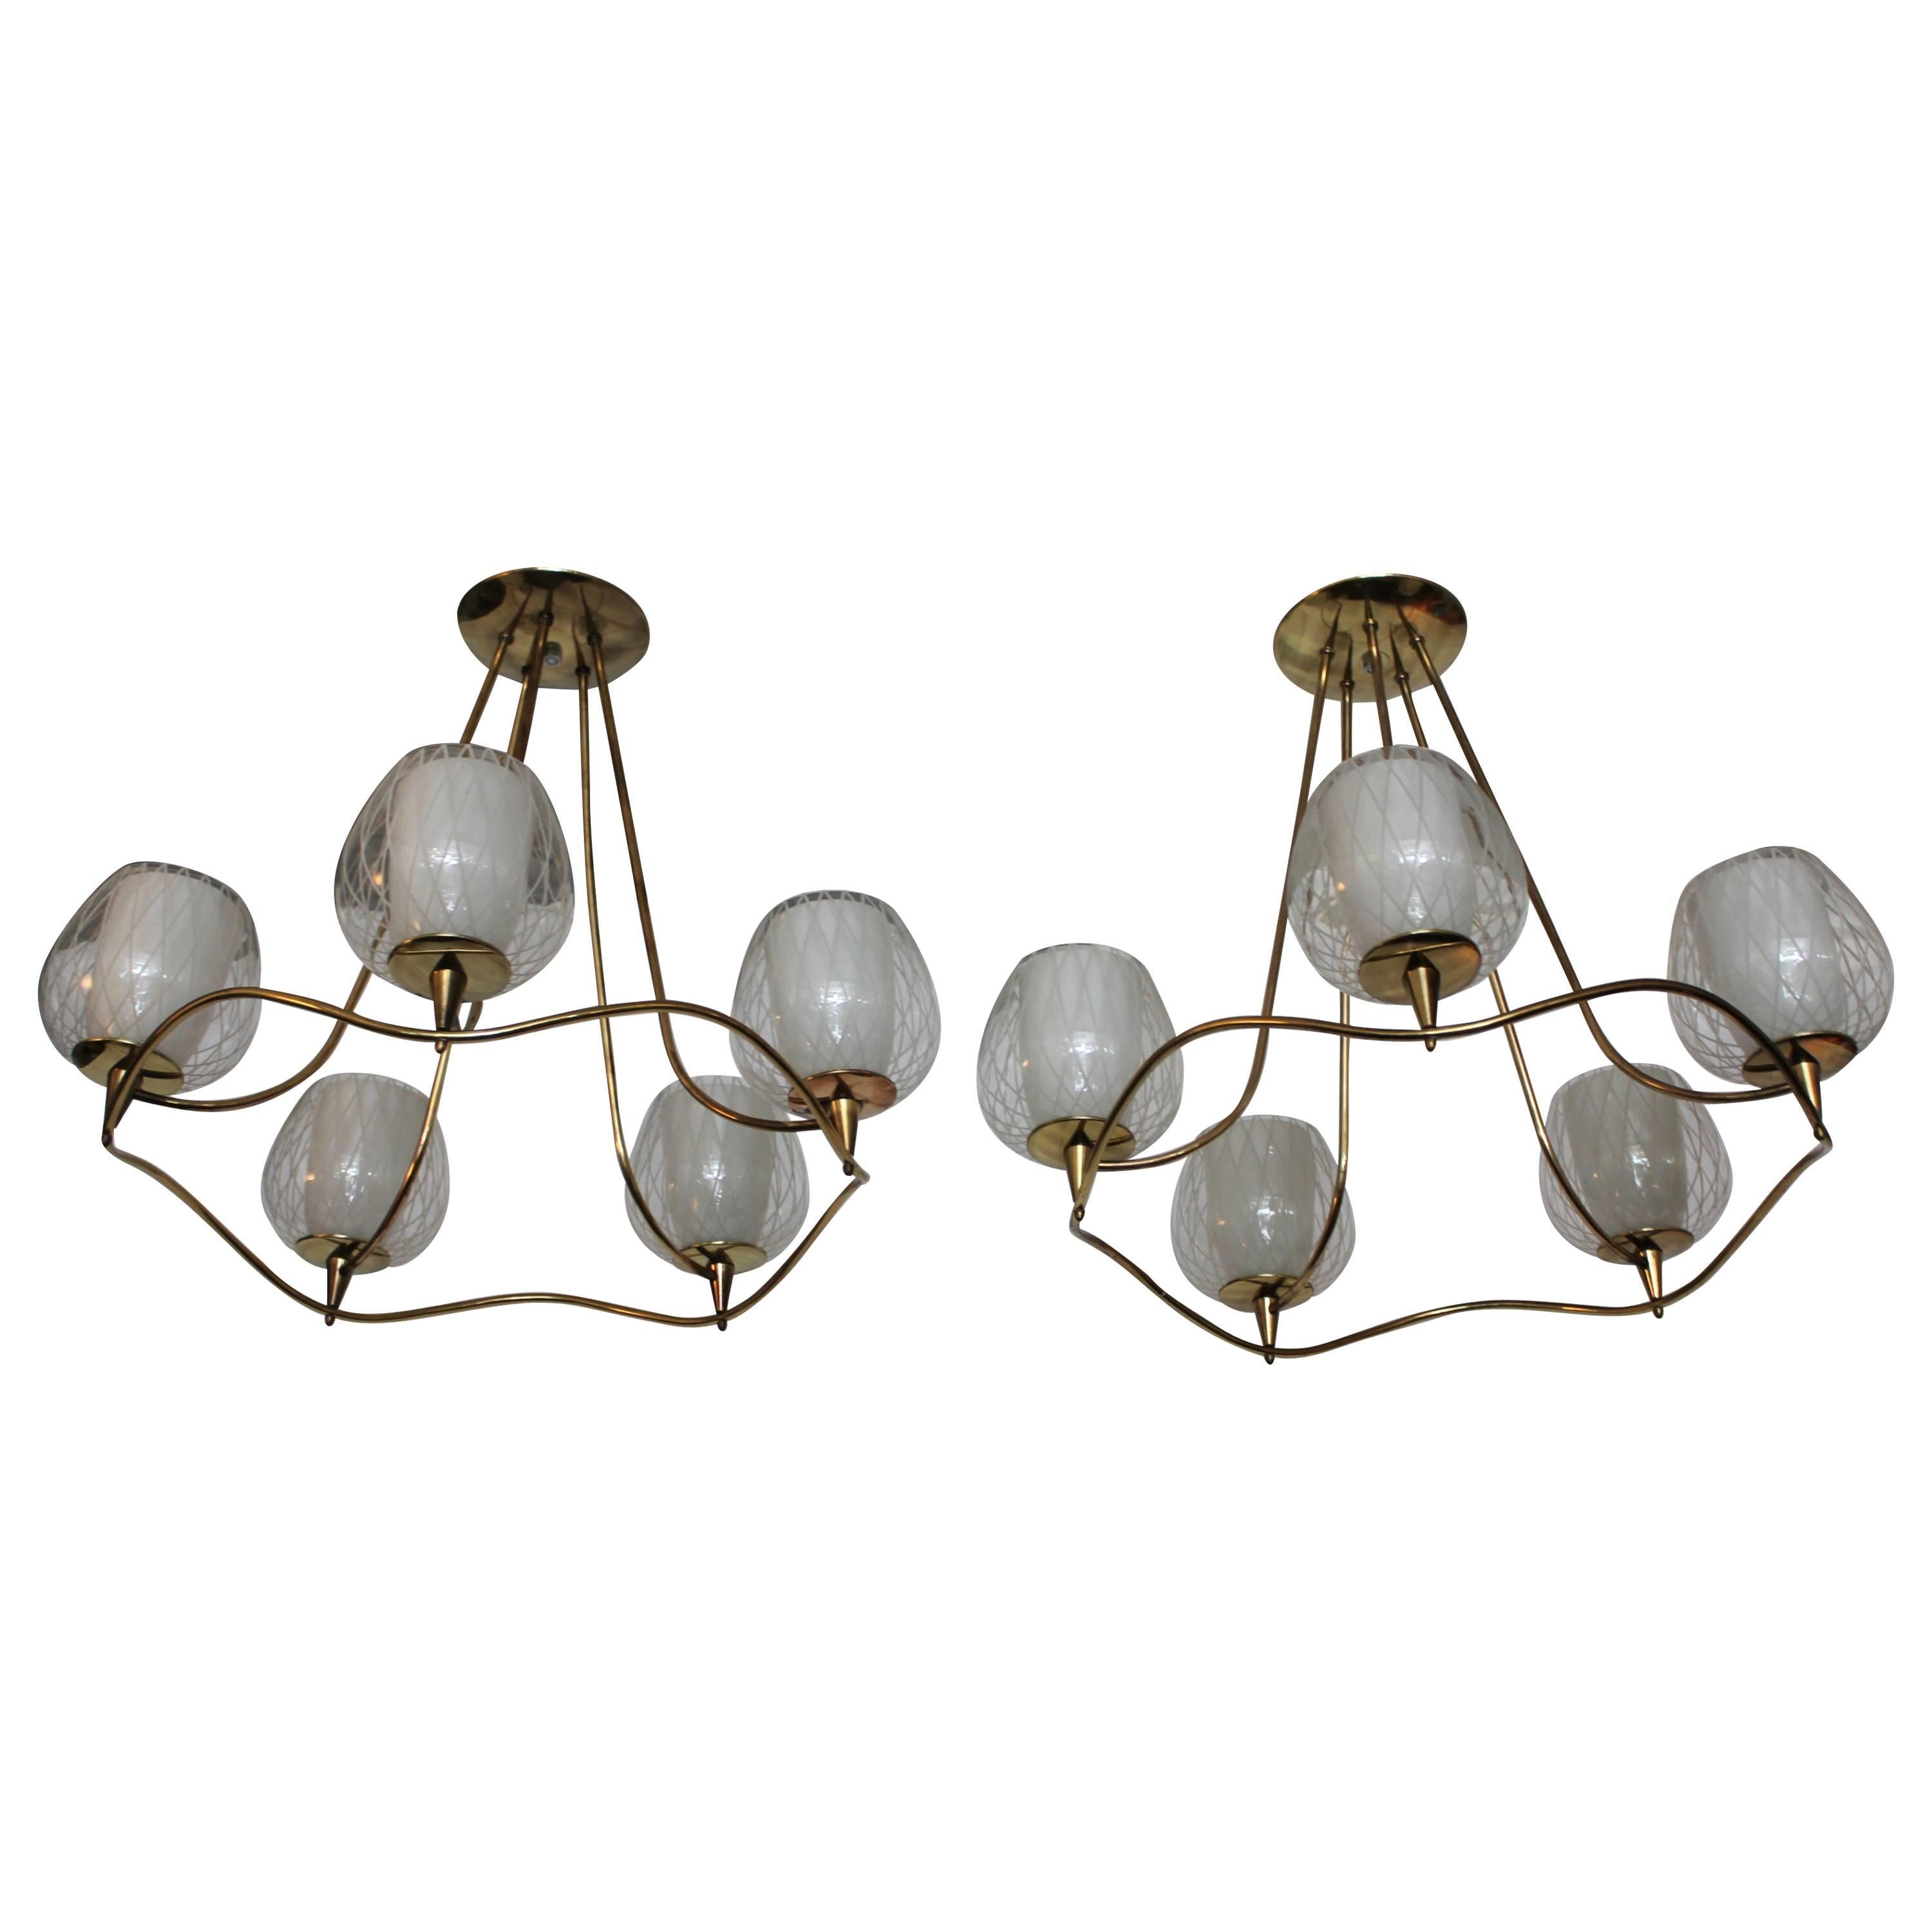 1950s Modern Brass and Glass Chandeliers by Lightolier